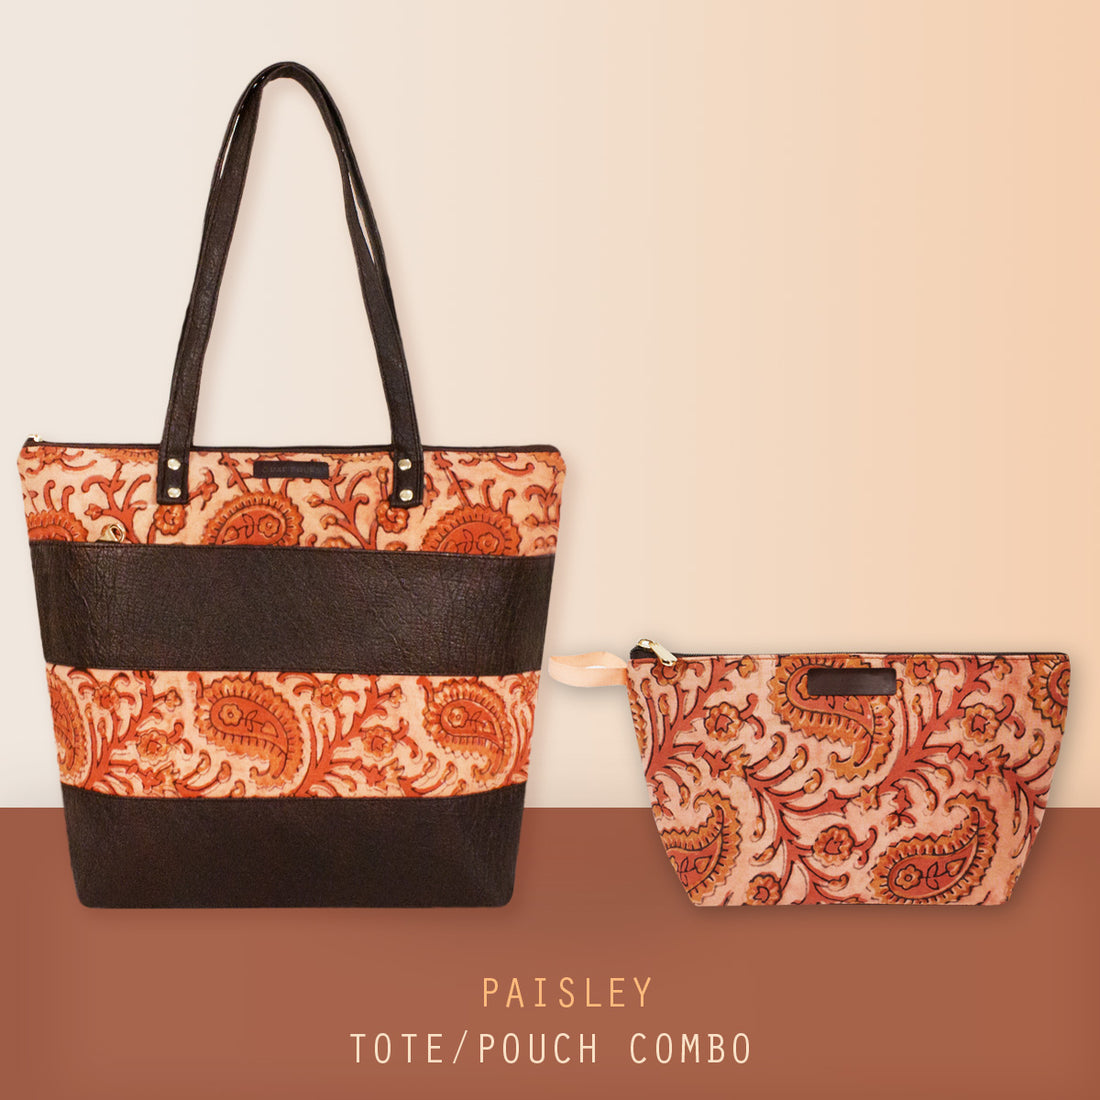 Paisley Tote/Pouch Combo